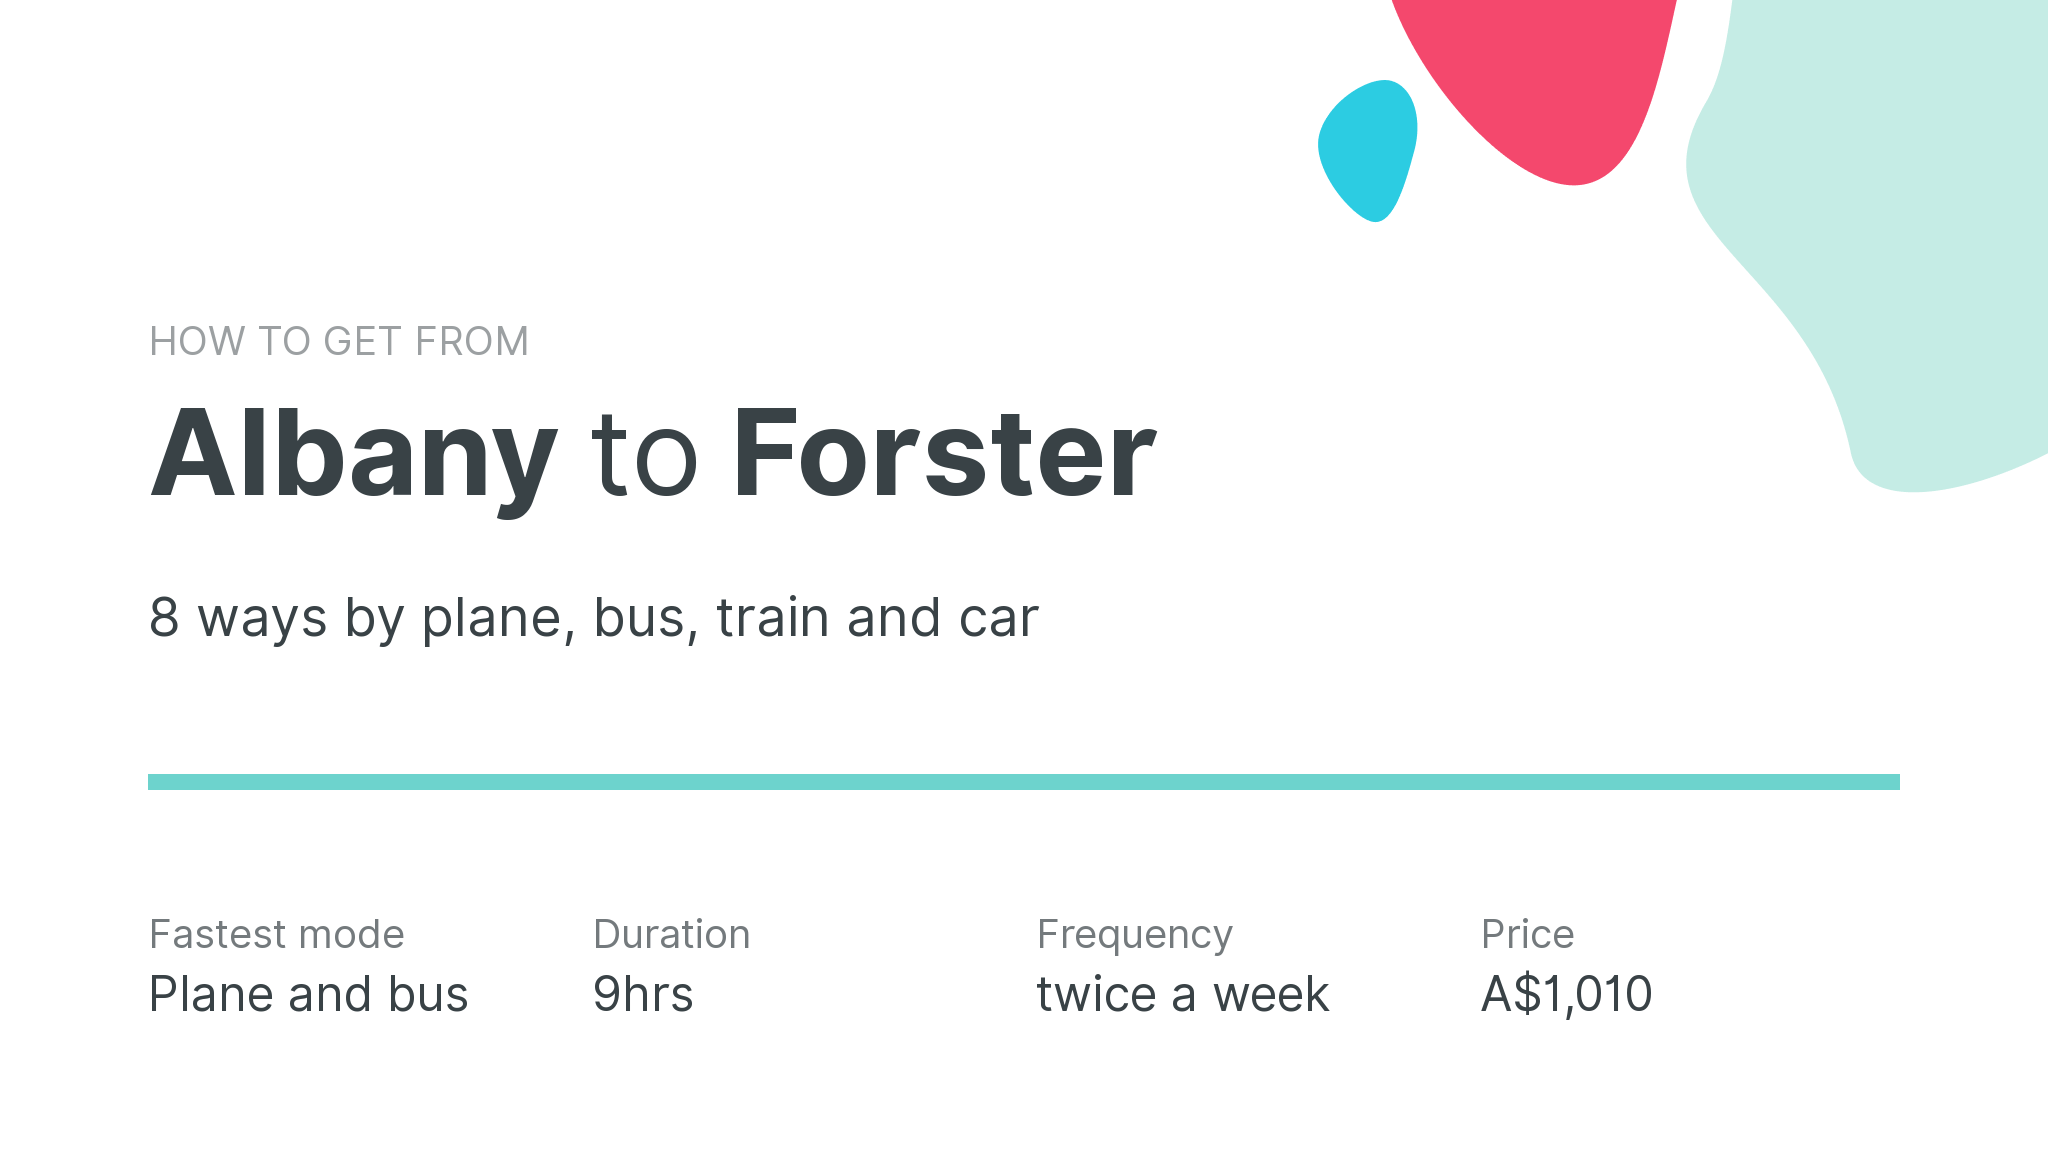 How do I get from Albany to Forster